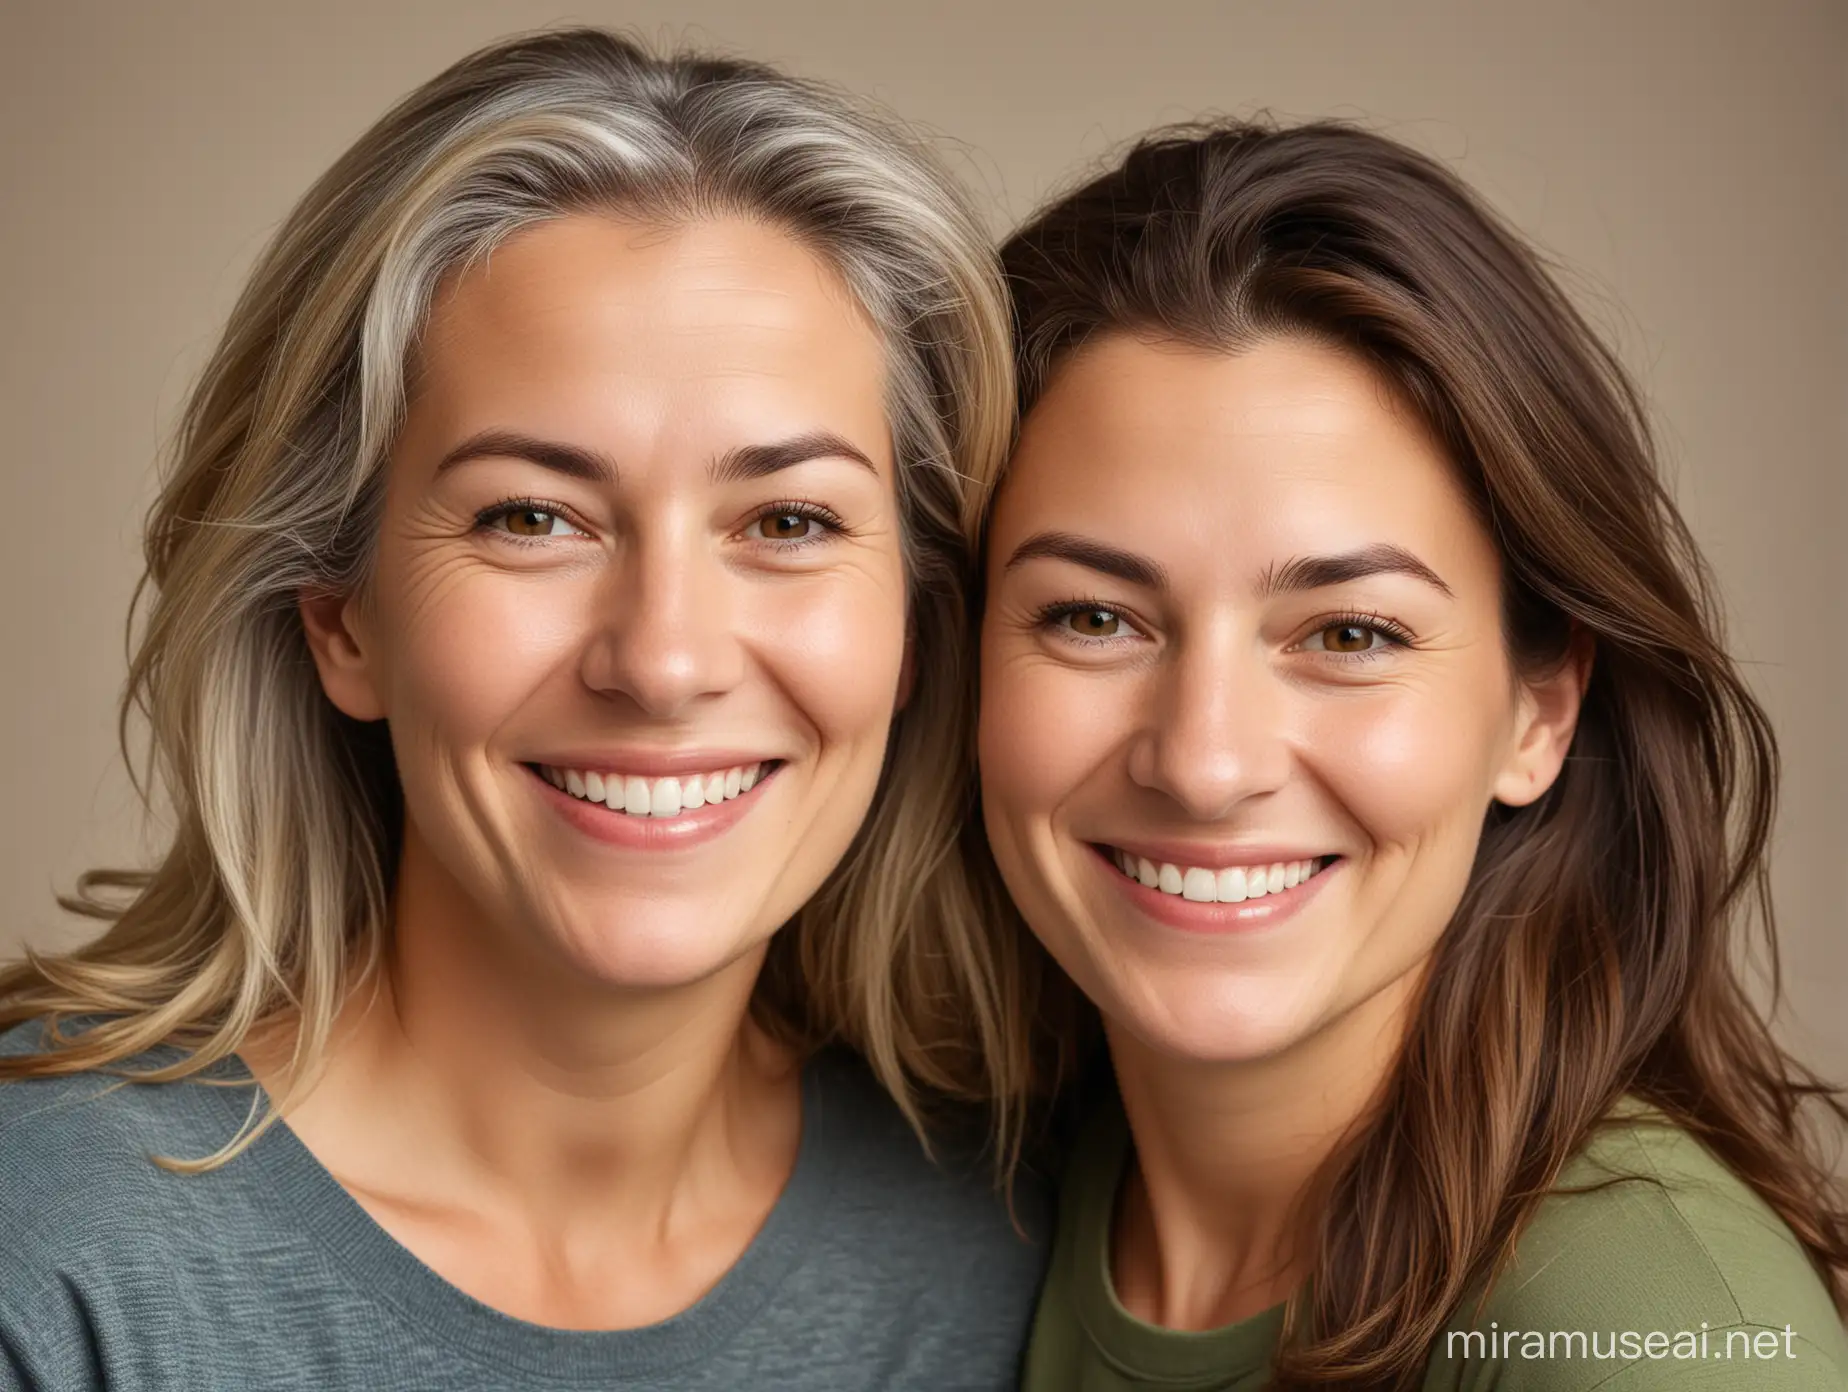 an image of a 50-year-old mother and her 20-year-old daughter smiling with simple background